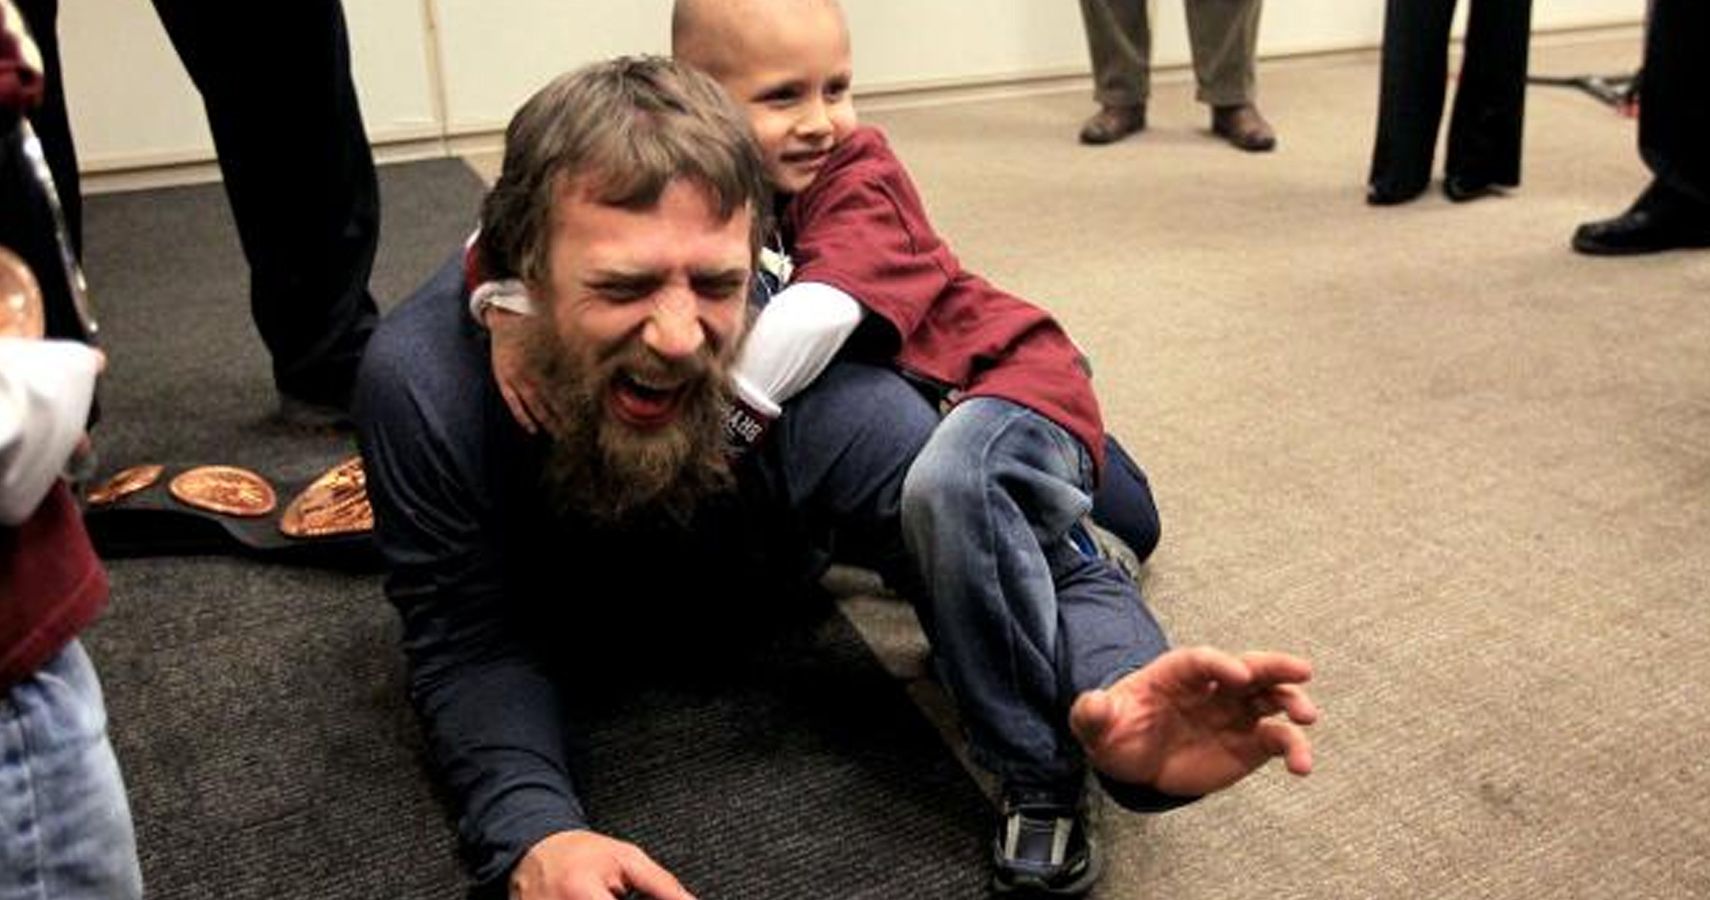 Connor the Crusher and Daniel Bryan